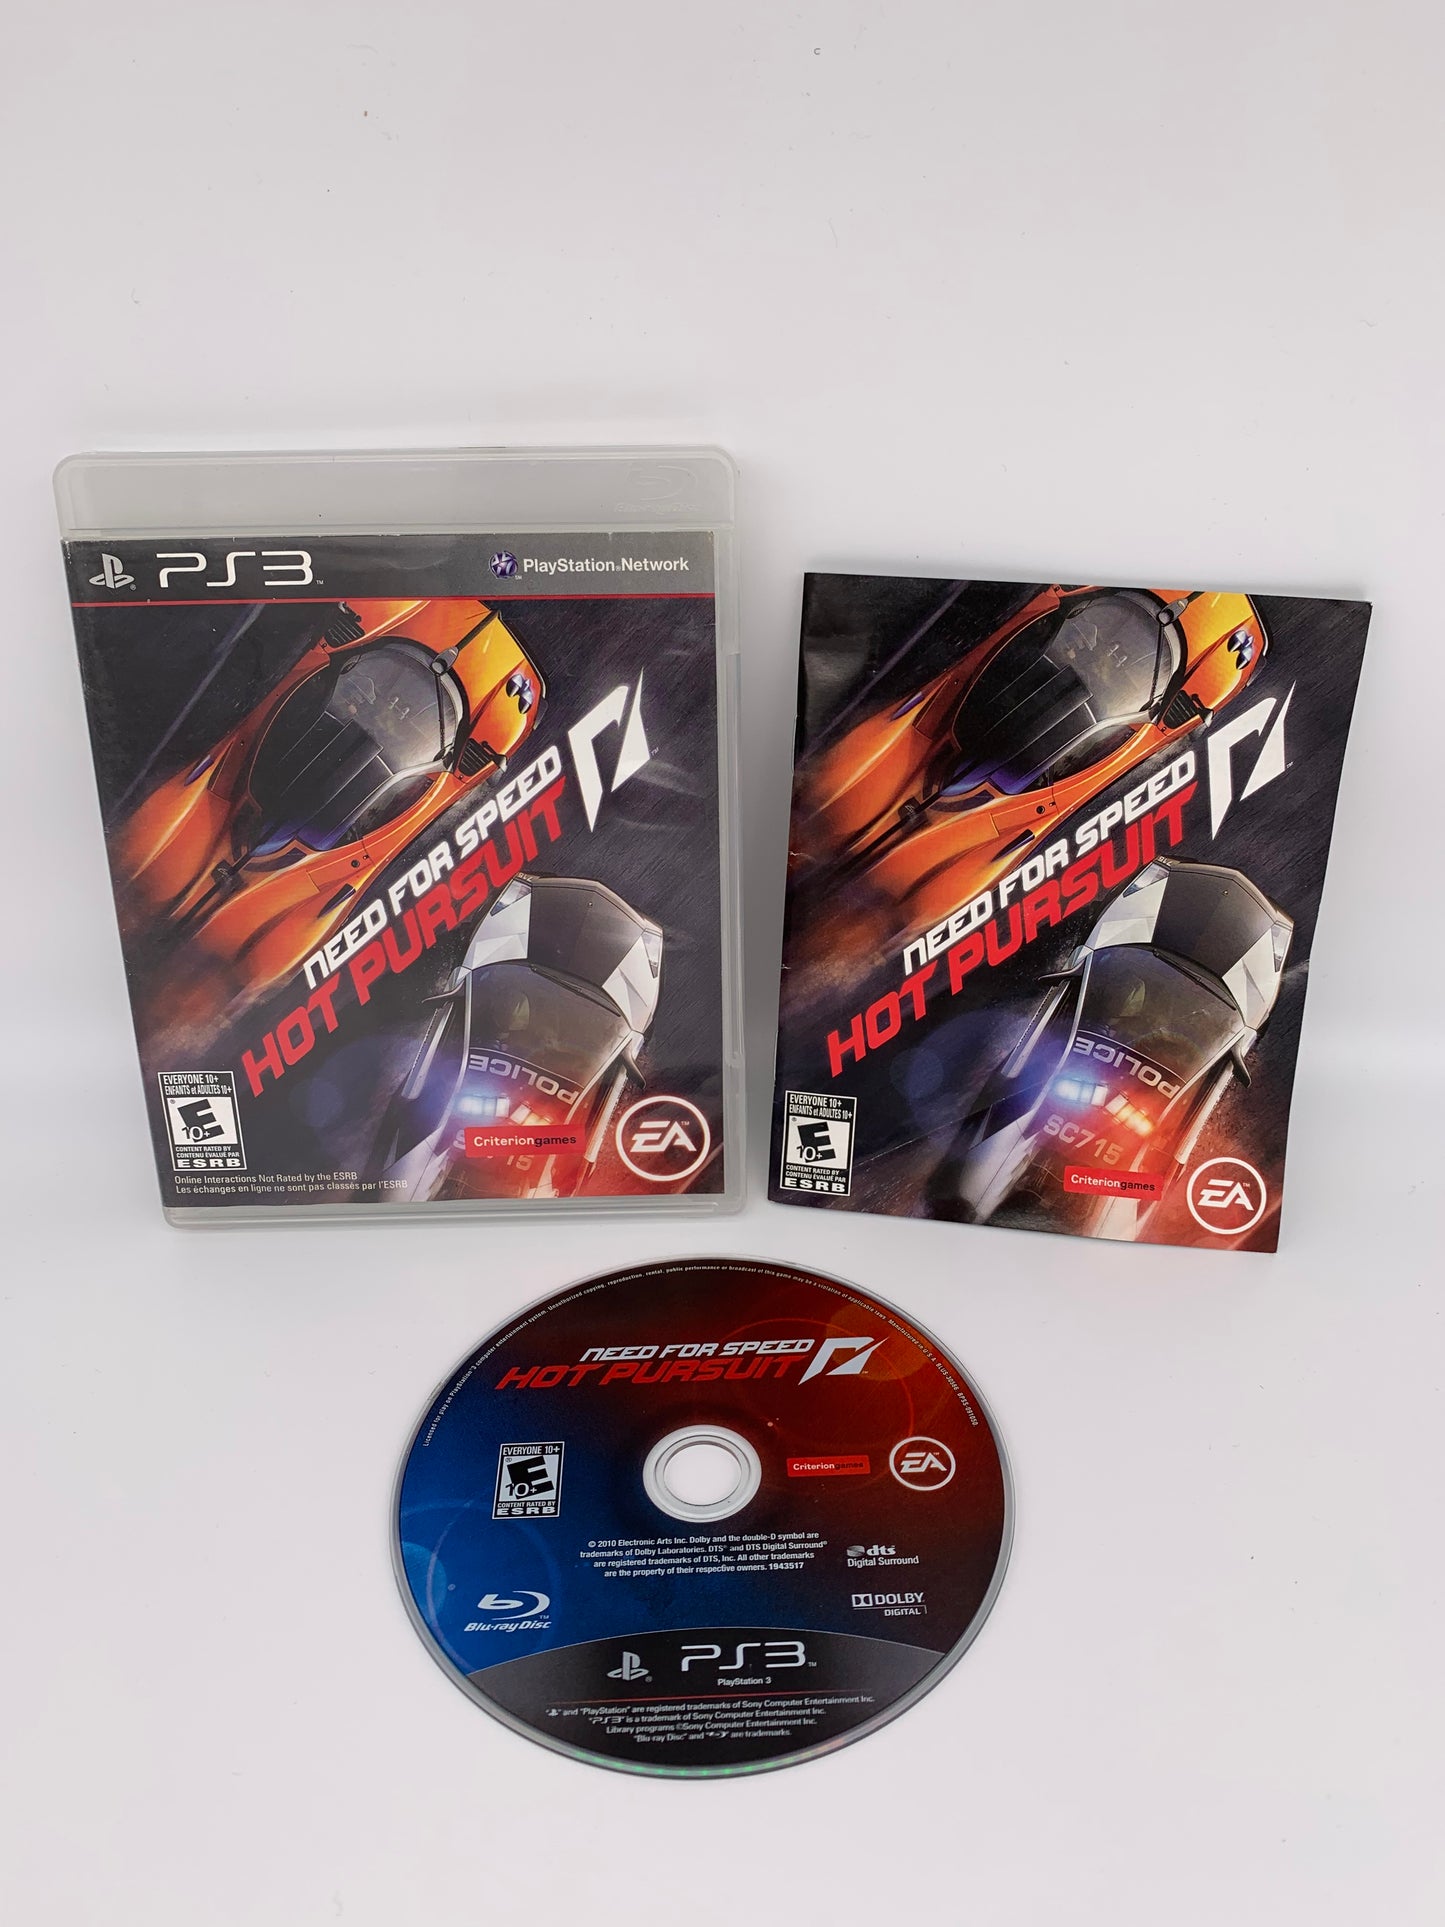 PiXEL-RETRO.COM : SONY PLAYSTATION 3 (PS3) COMPLET CIB BOX MANUAL GAME NTSC NEED FOR SPEED HOT PURSUIT